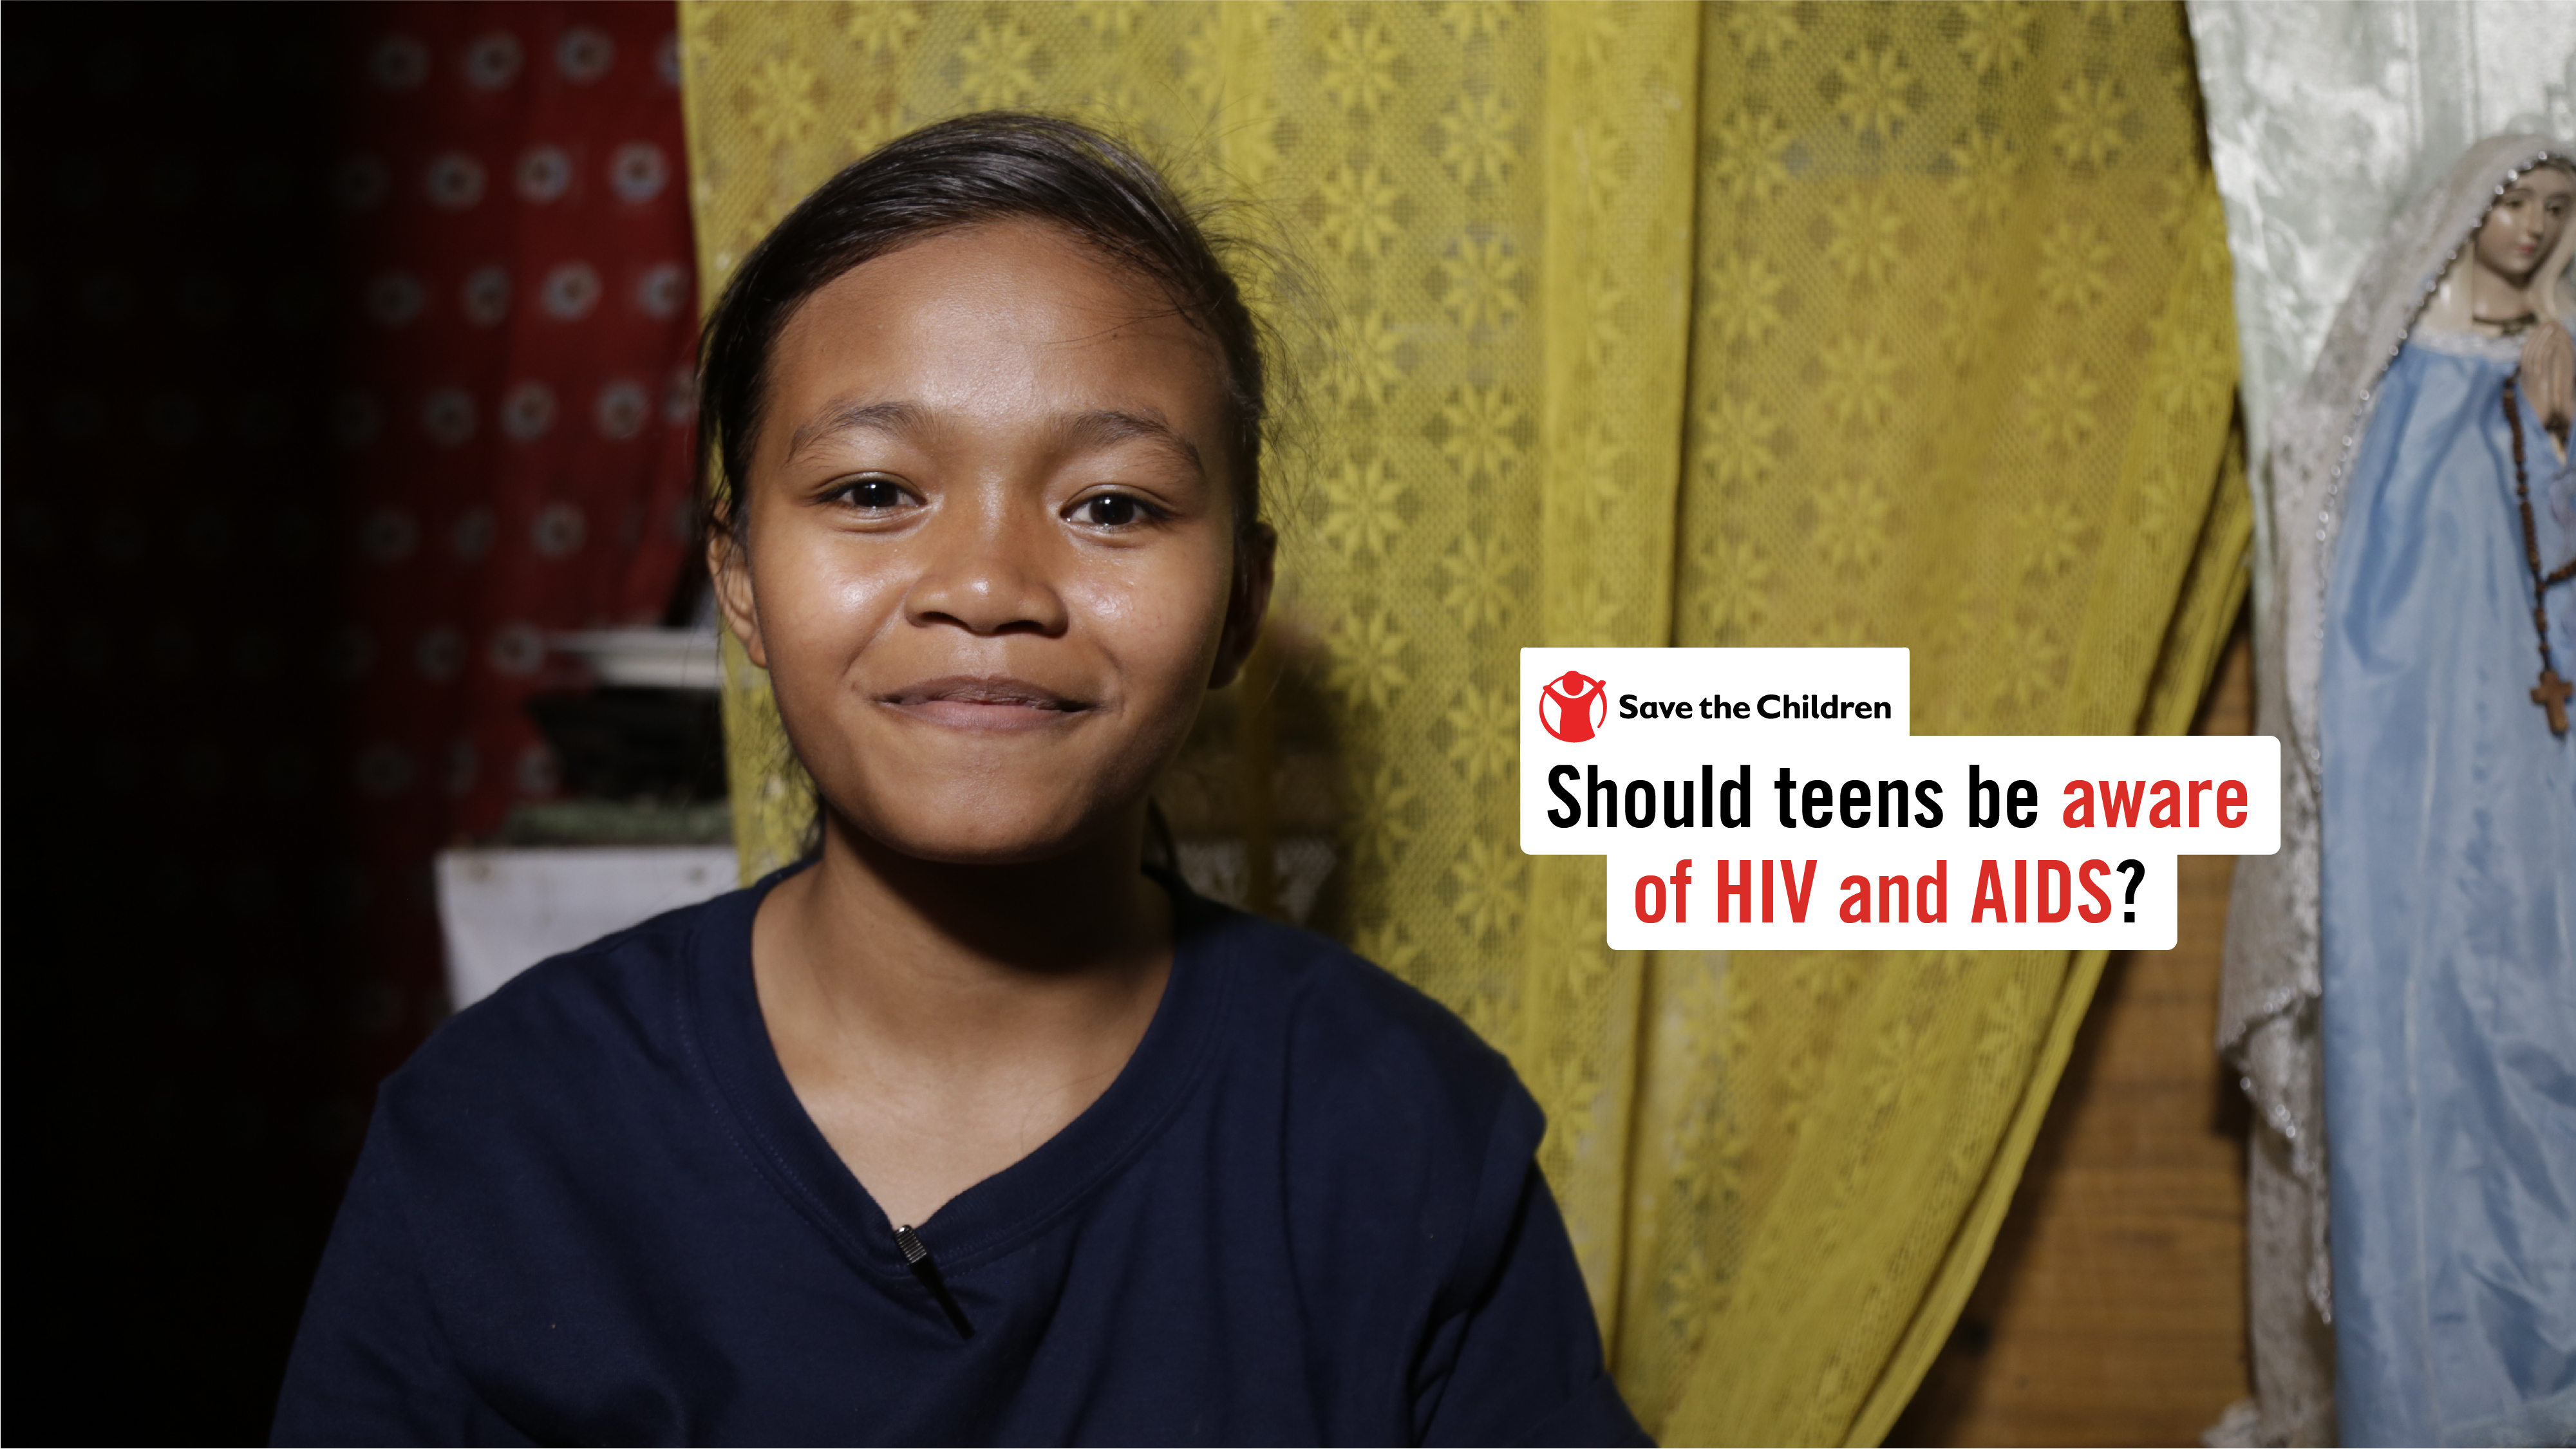 WATCH: Should teens be aware of HIV and AIDS?